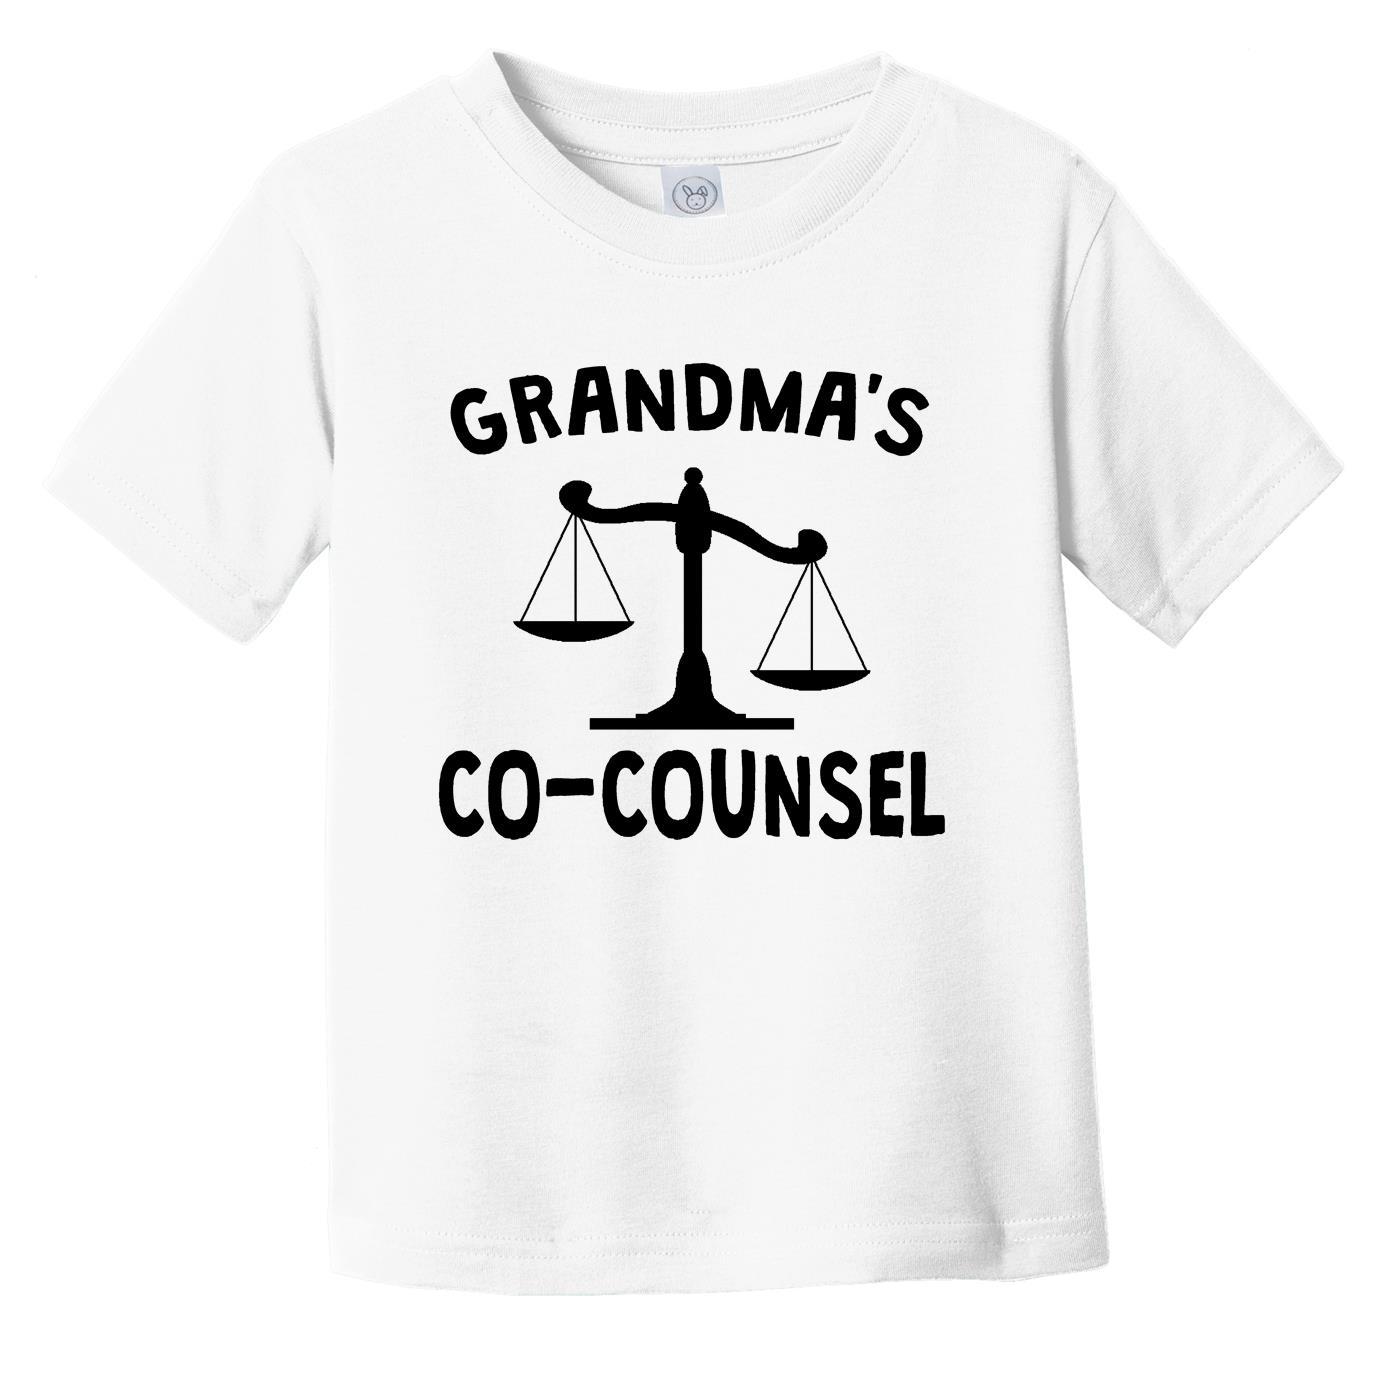 Grandma's Co-Counsel Funny Infant Toddler T-Shirt For Grandchild Of Lawyer